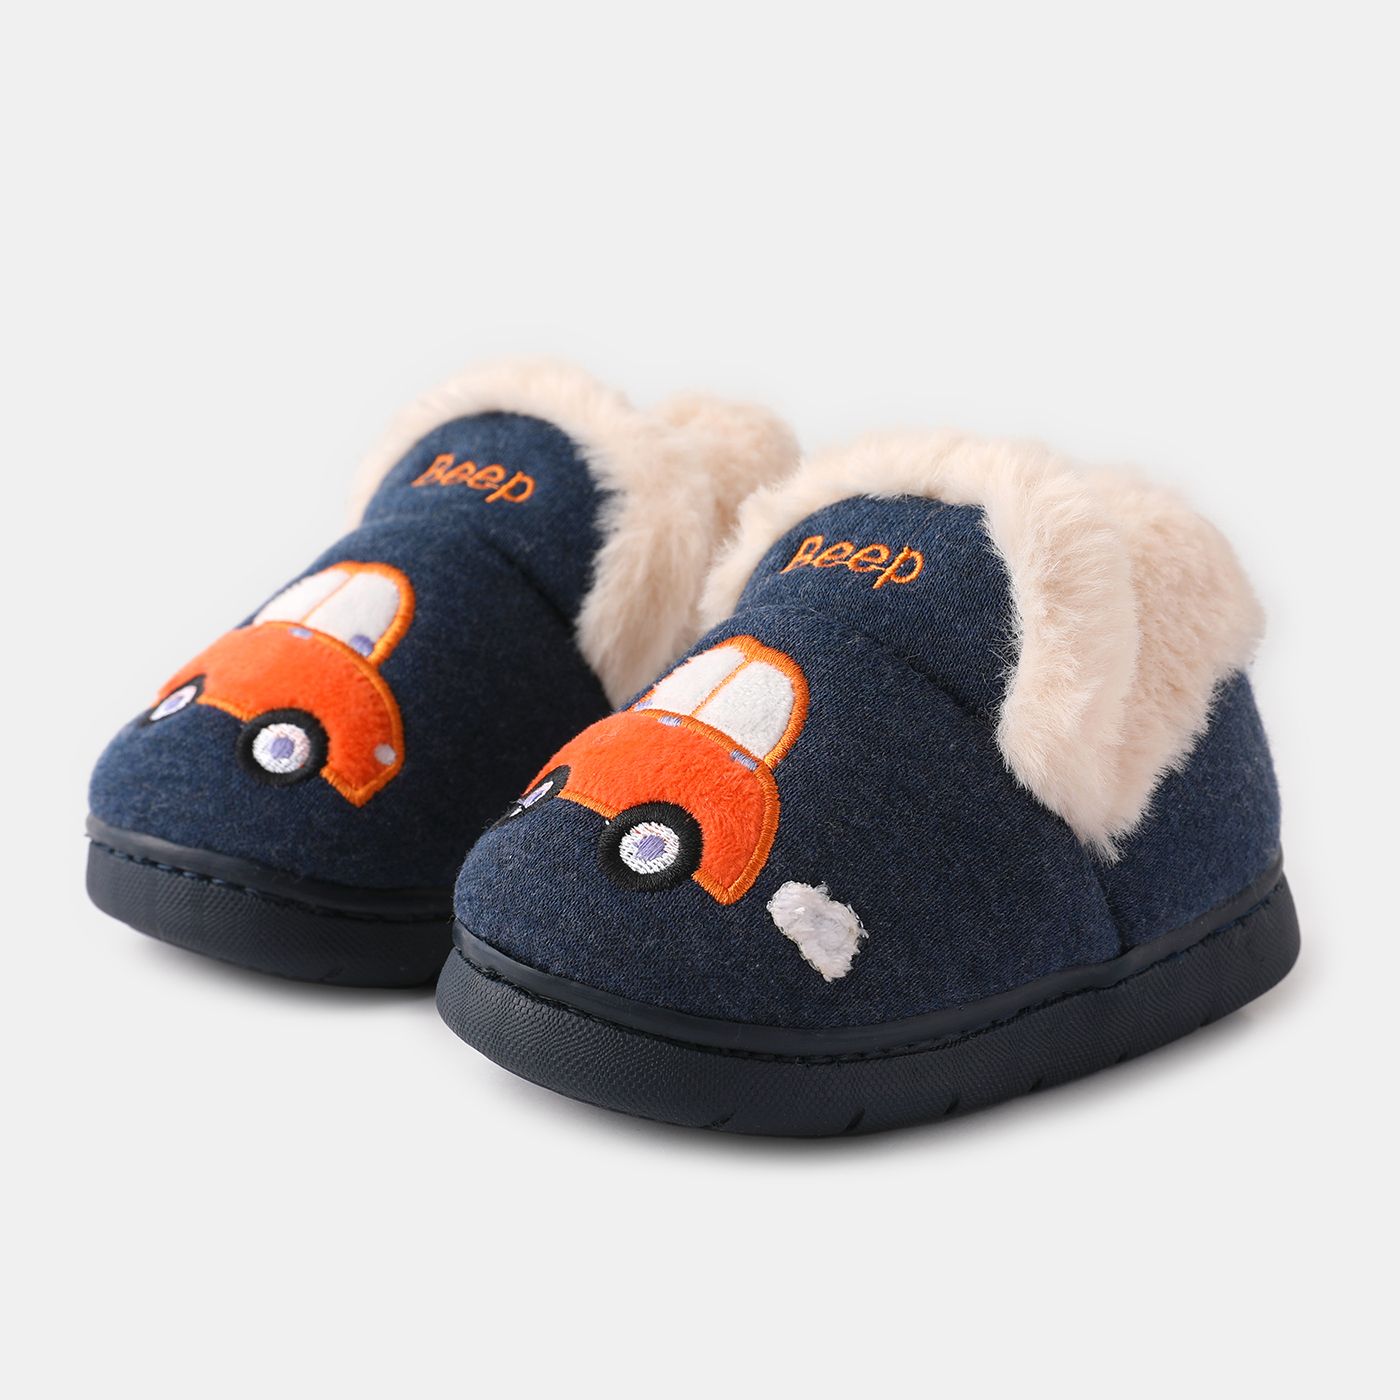 Toddler & Kid Boys Casual Vehicle Pattern Fleece Slippers Shoes